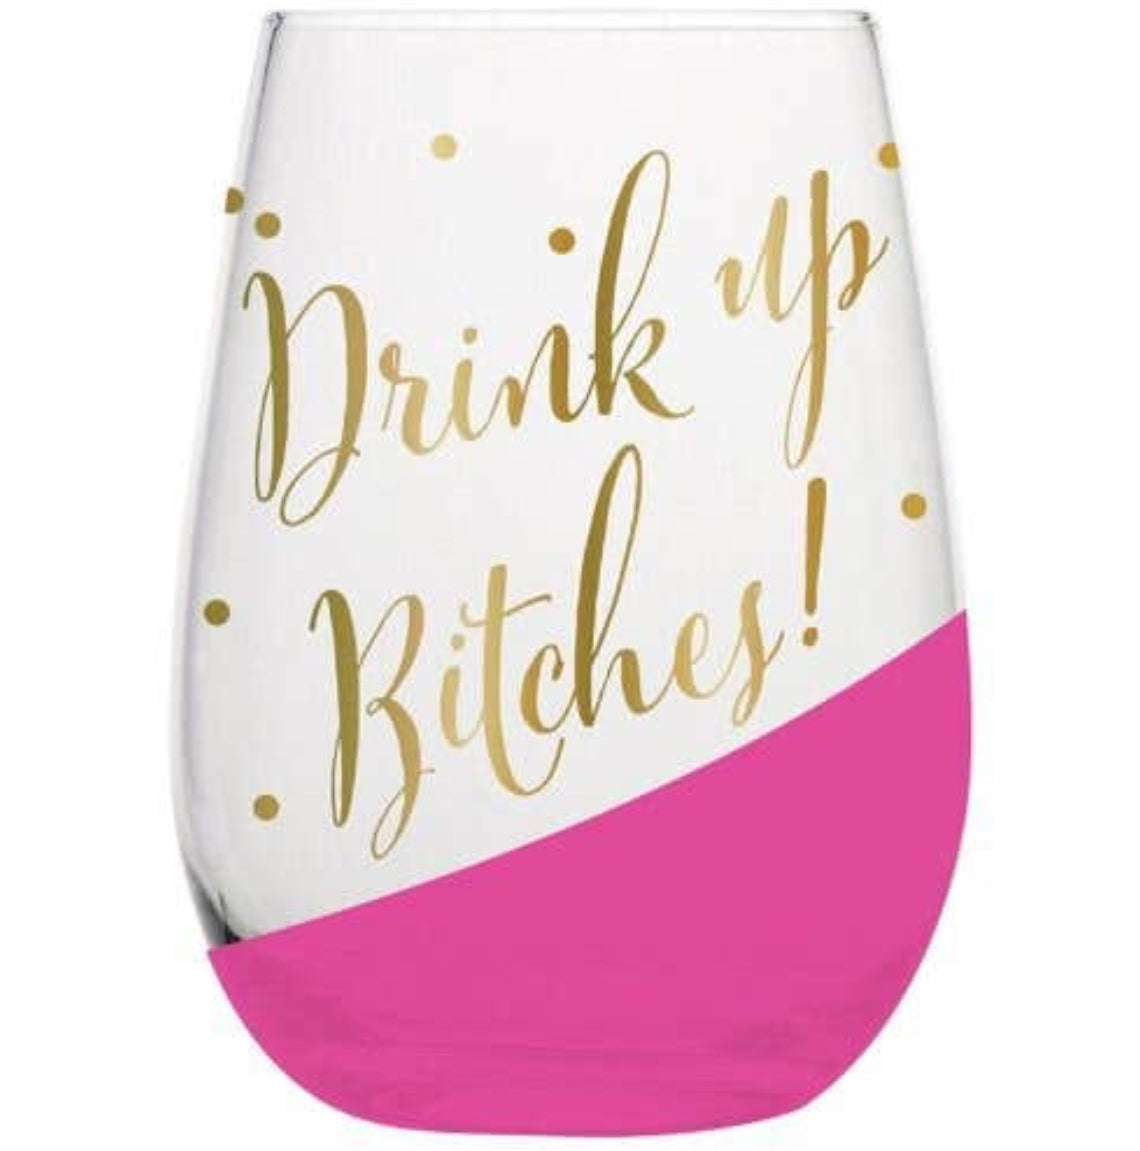 Drink up wine glass - LURE Boutique